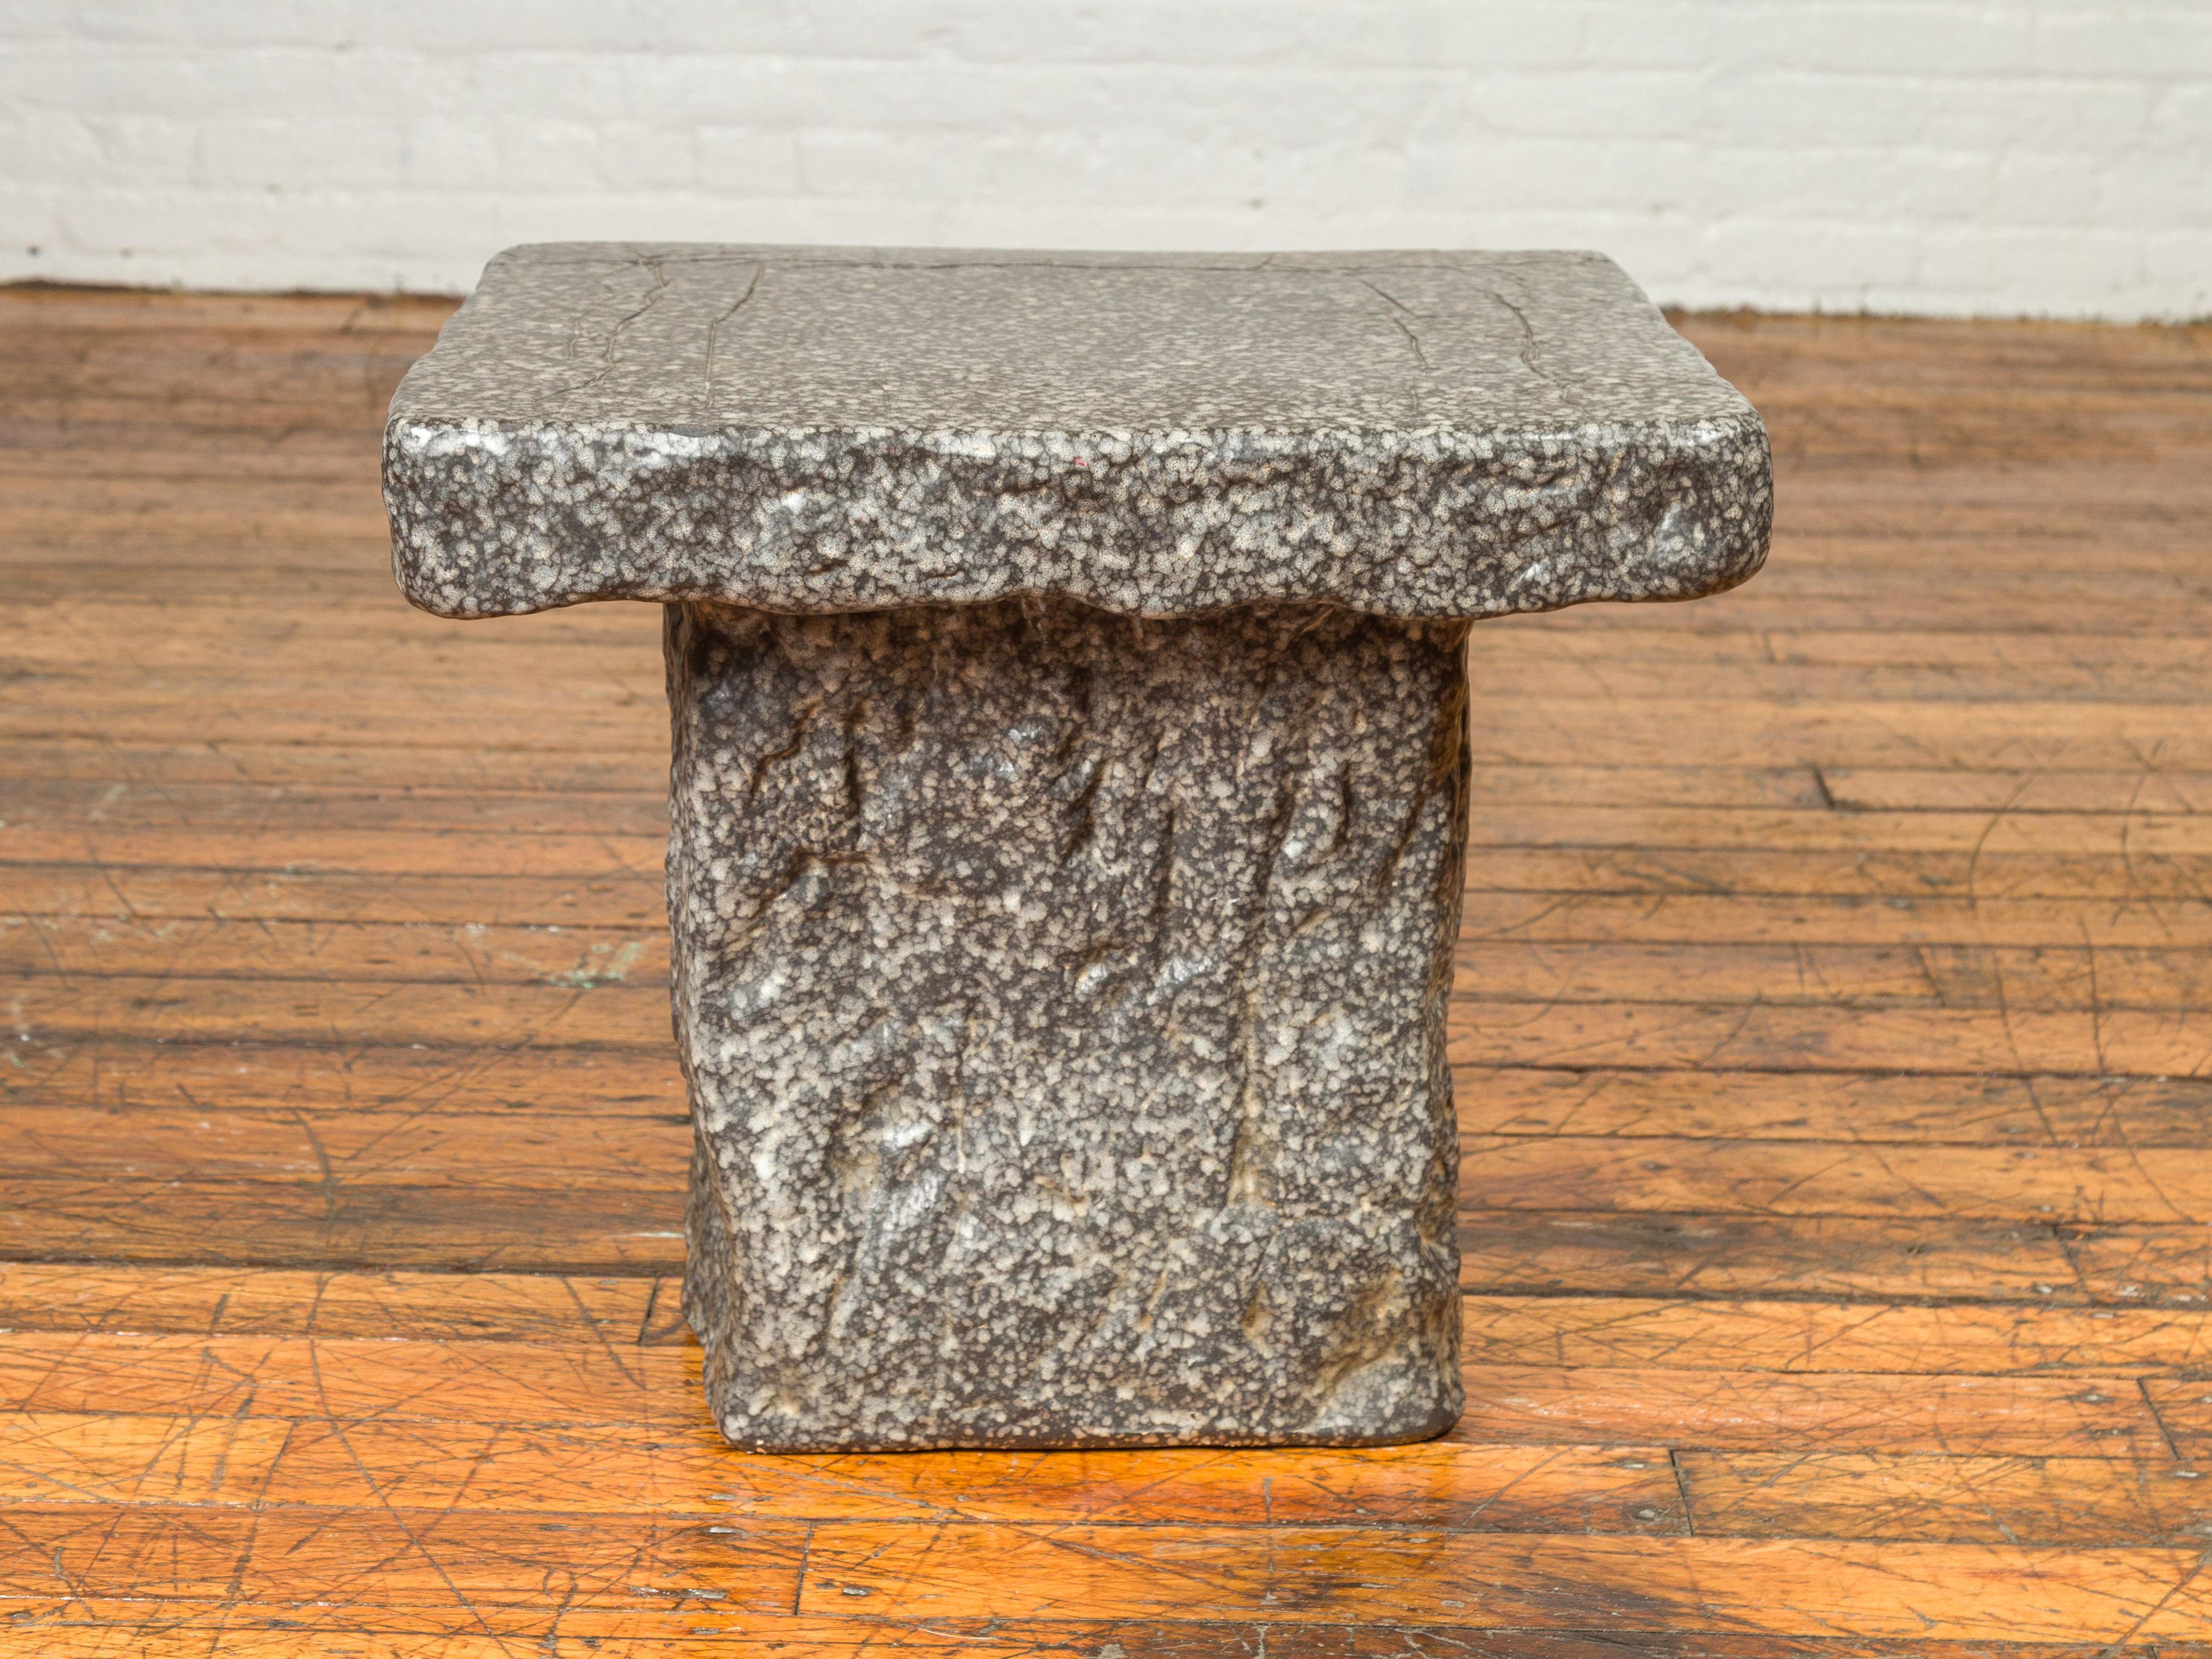 A Japanese Taisho period exterior stone garden seat from the early 20th century, with rustic appearance. Crafted in Japan during the first quarter of the 20th century, this Taisho period garden seat features a rectangular seat overhanging a